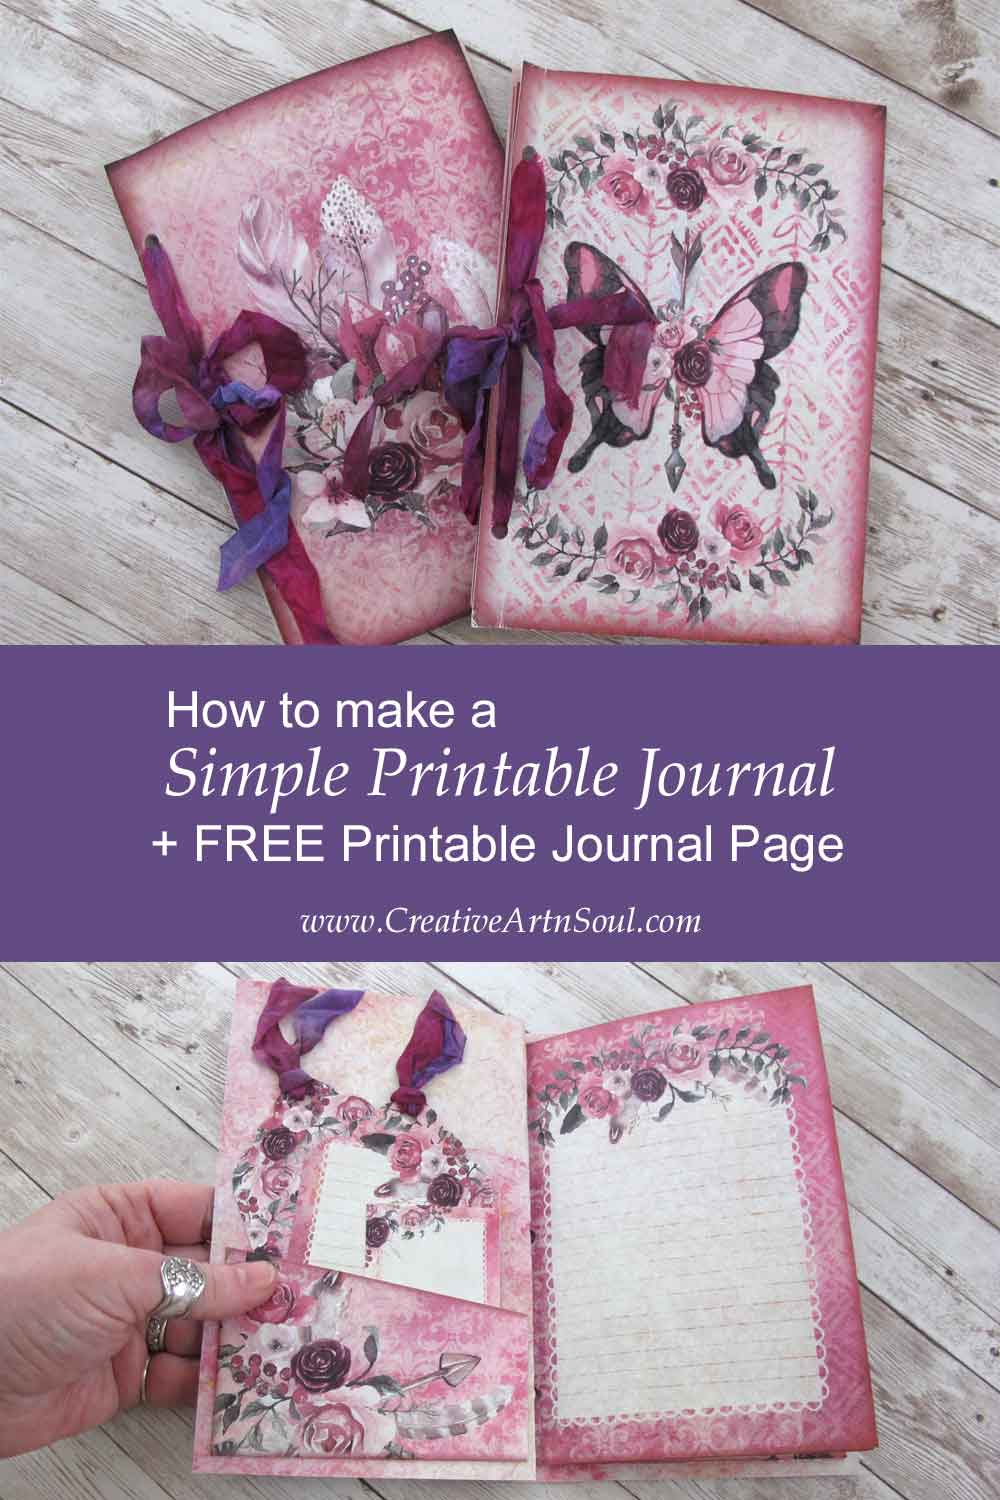 How to make a Simple Printable Writing Journal